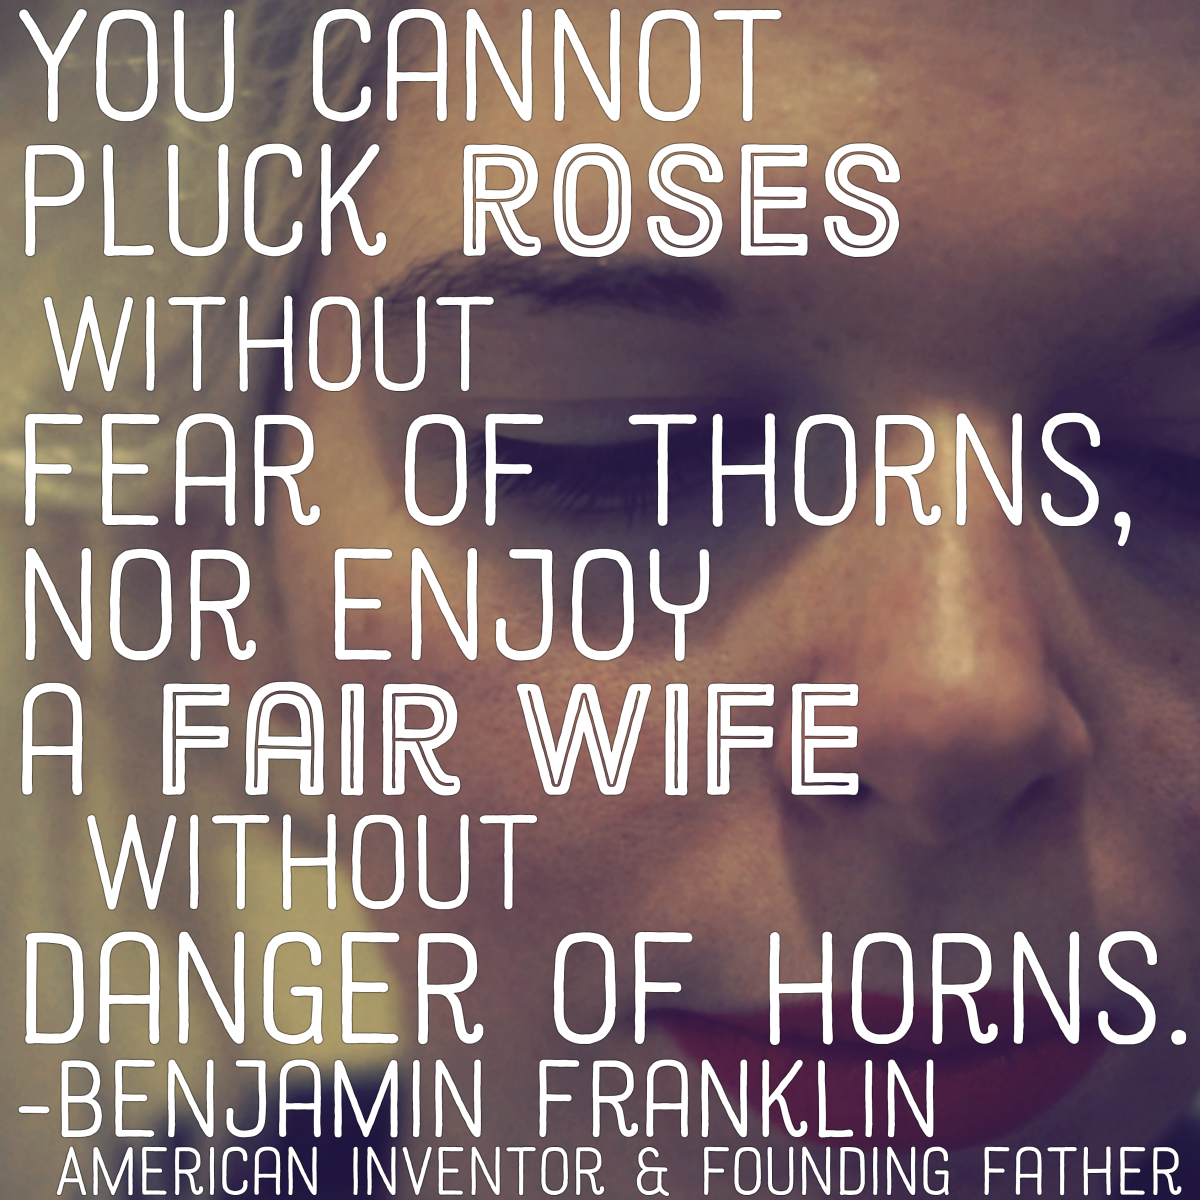 "You cannot pluck roses without fear of thorns, nor enjoy a fair wife without danger of horns." —Benjamin Franklin, American inventor and Founding Father